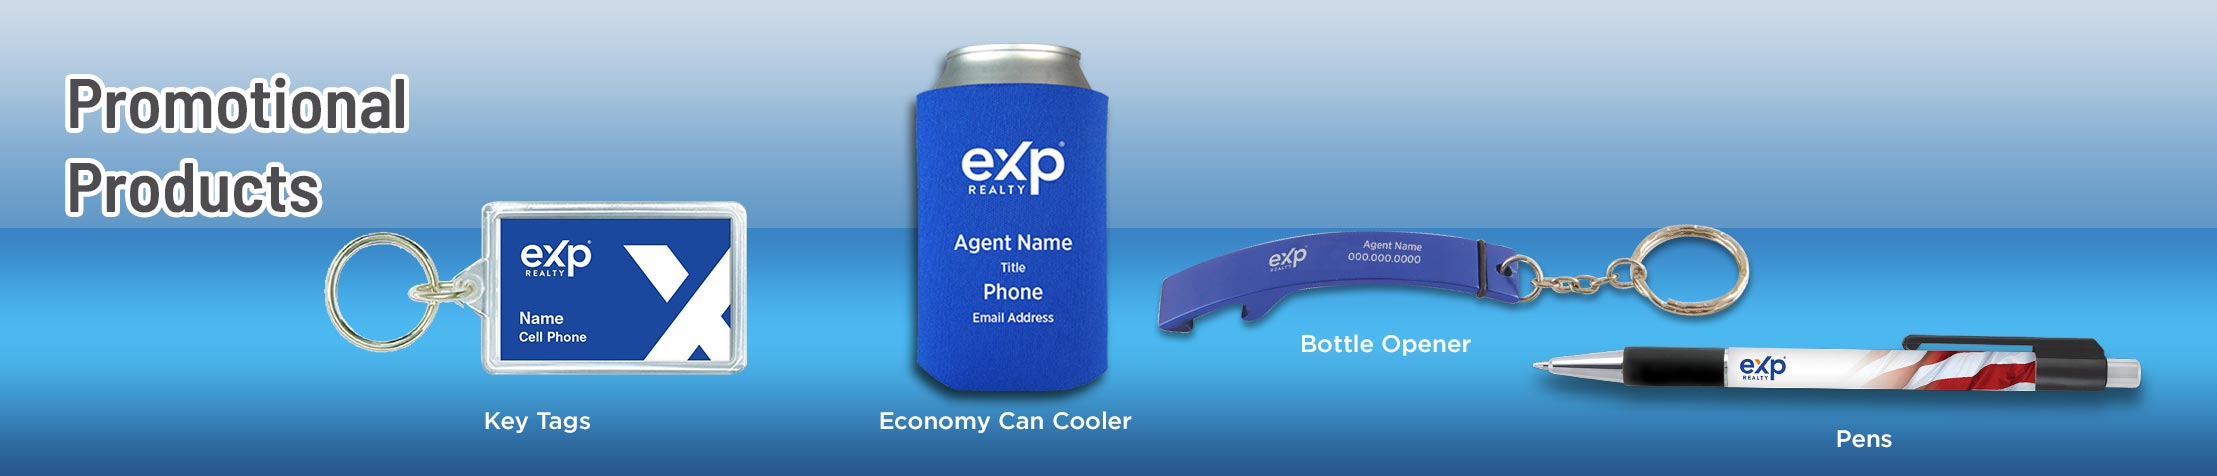 eXp Realty Real Estate Promotional Products -  personalized promotional pens, key chains, tote bags, flashlights, mugs | Sparkprint.com